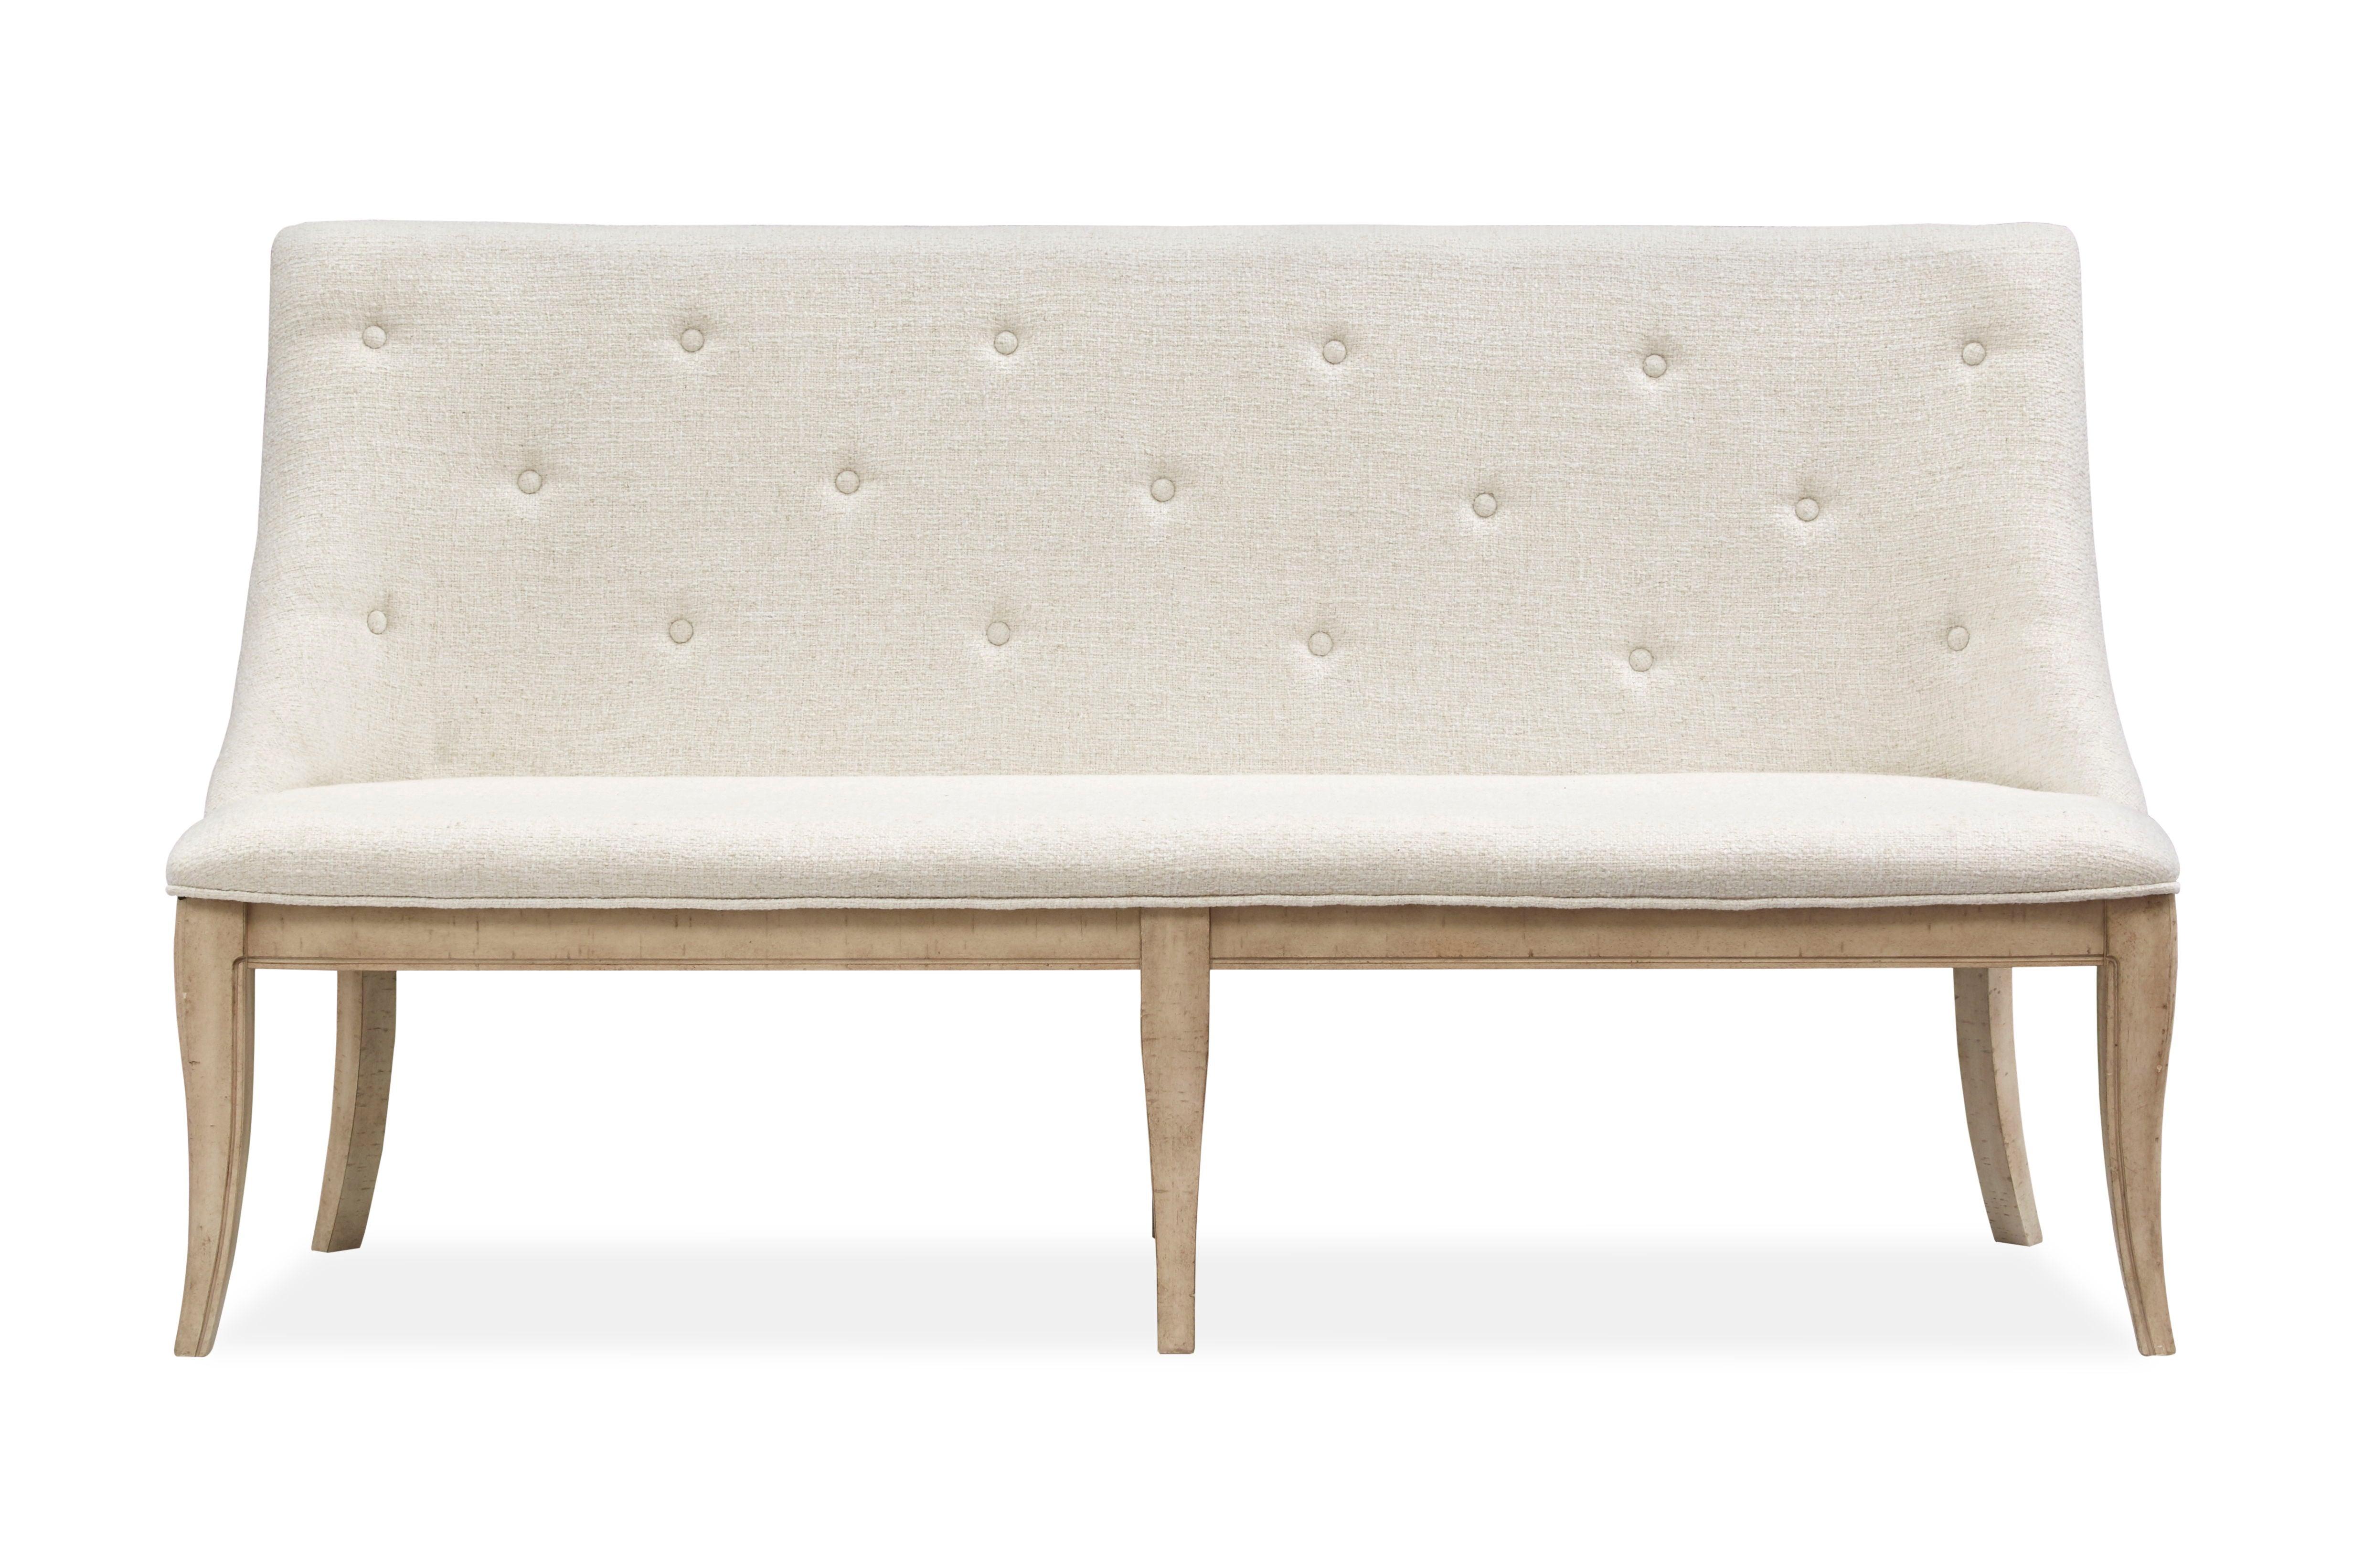 Magnussen Furniture - Harlow - Dining Bench With Upholstered Seat & Back - Weathered Bisque - 5th Avenue Furniture